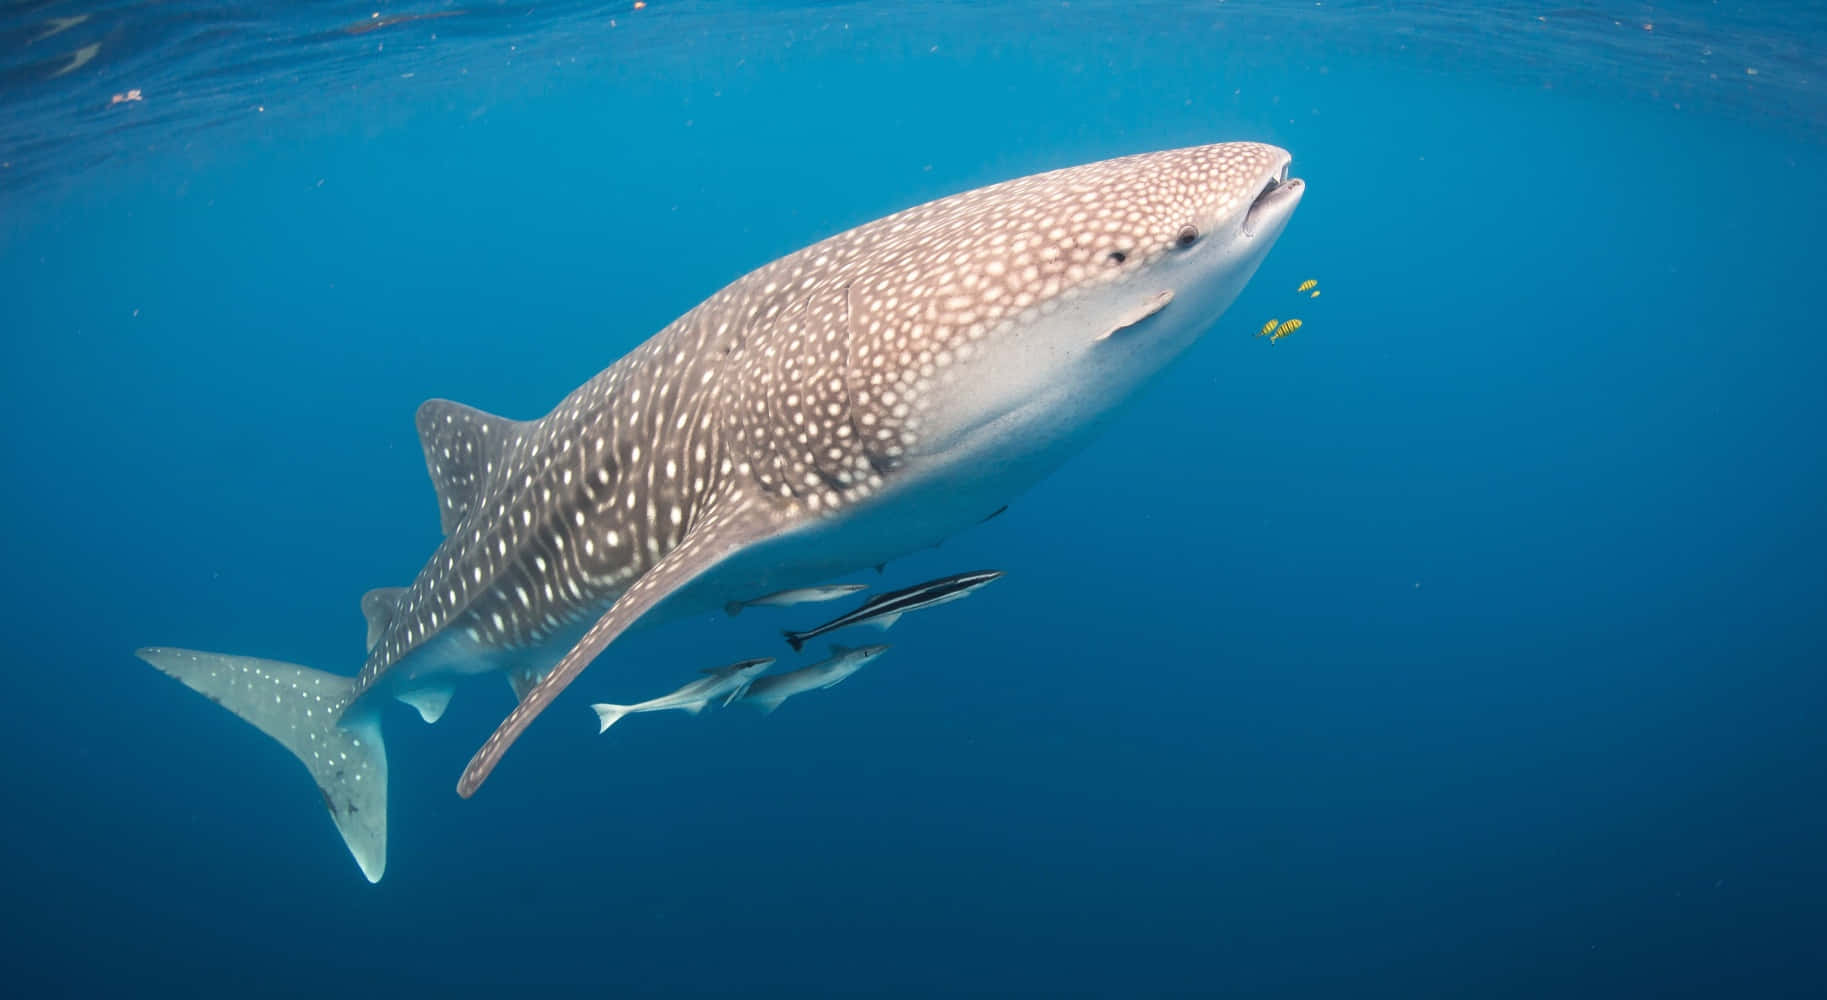 A Friendly Whale Shark Swims in the Pristine, Blue Waters of the Caribbean Sea